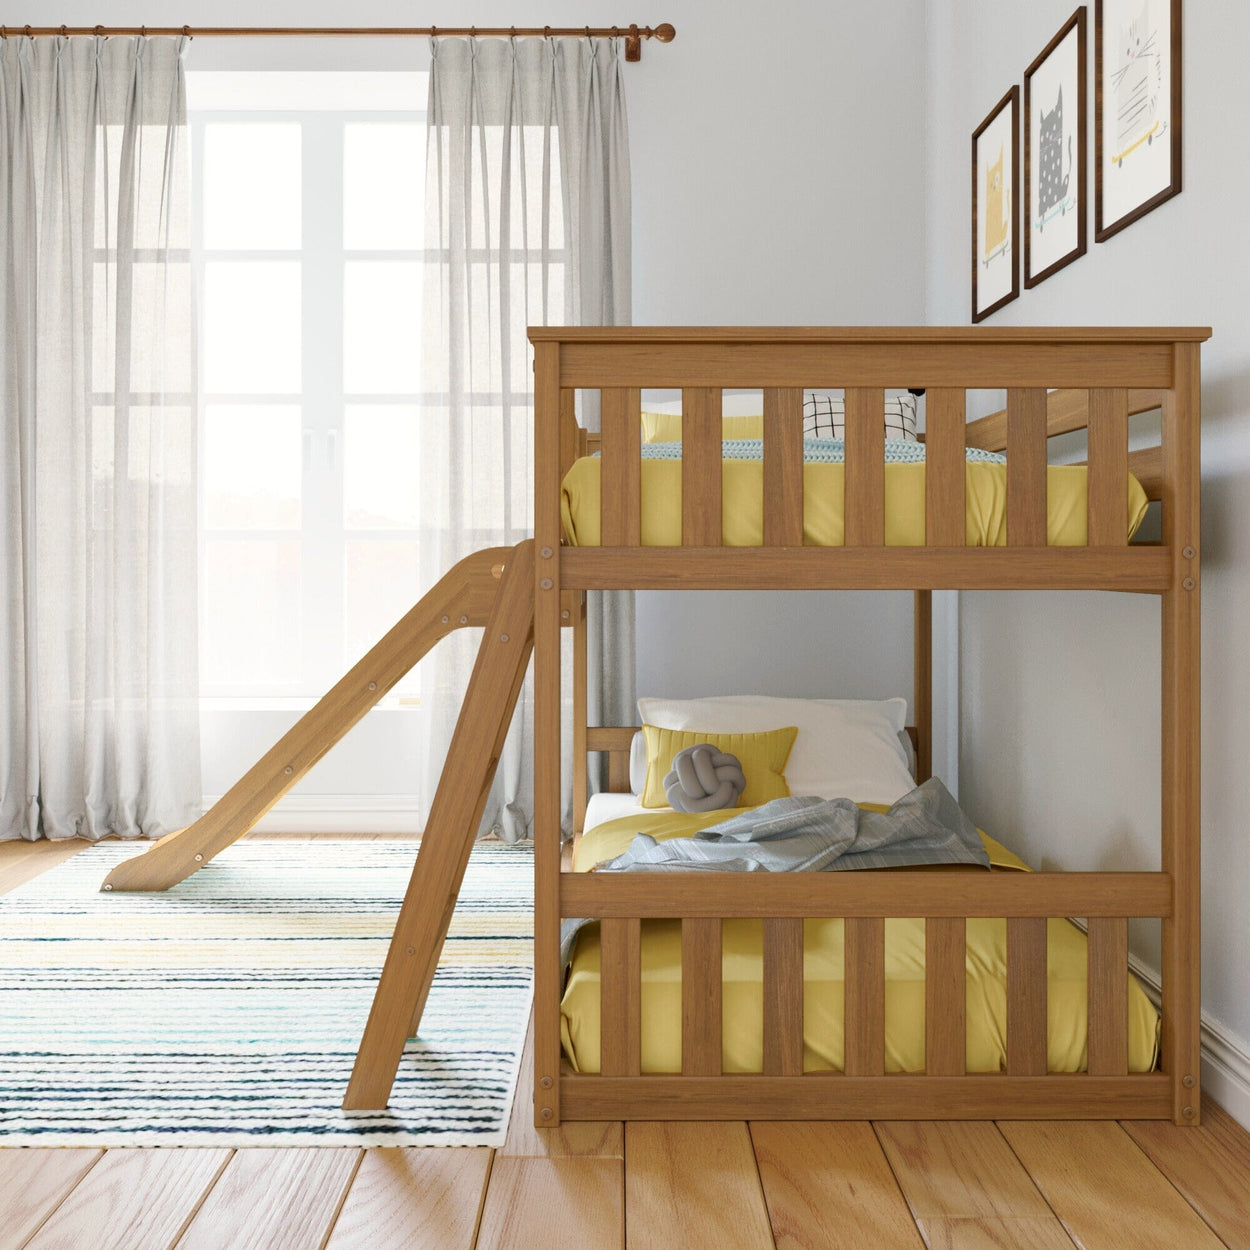 180417-007 : Bunk Beds Max & Lily Twin Size Low Loft Bed with Slide and Ladder, Classic Solid Wood Kids Bedroom Furniture, 400 lbs Weight Capacity, 14" Safety Guardrail, Anti-Slip Steps, Pecan